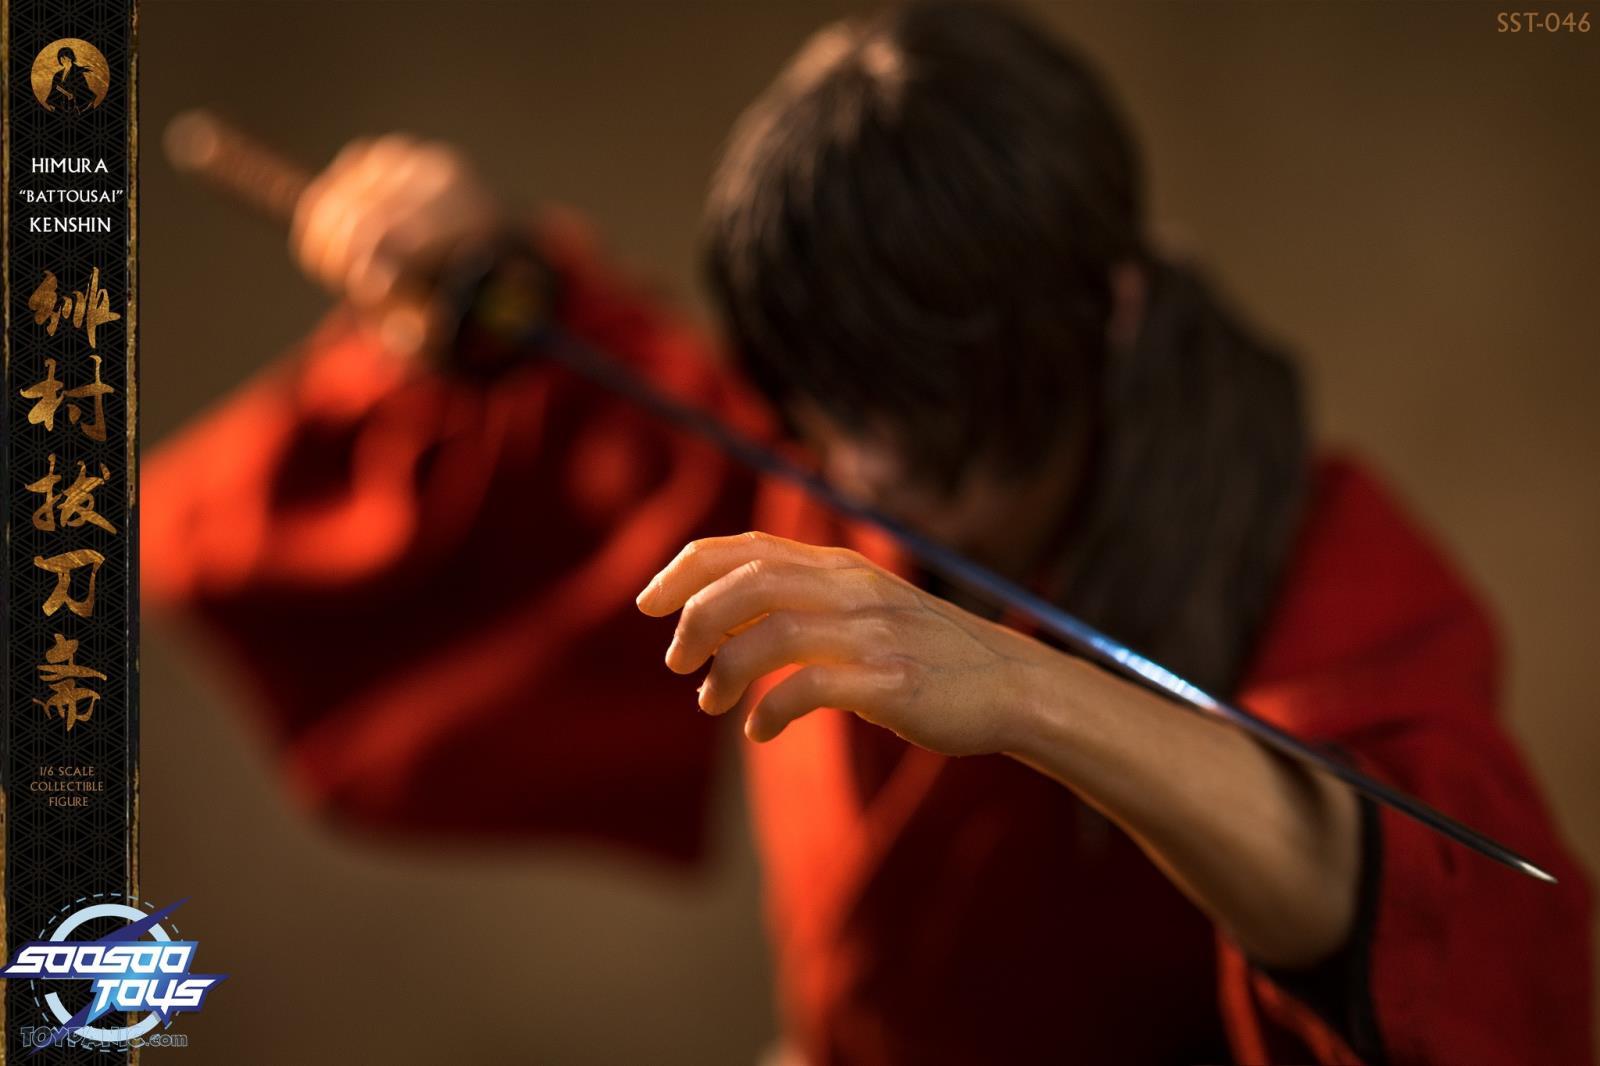 kenshin - NEW PRODUCT: 1/6 scale Rurouni Kenshin Collectible Figure from SooSooToys 712202251229PM_8652112